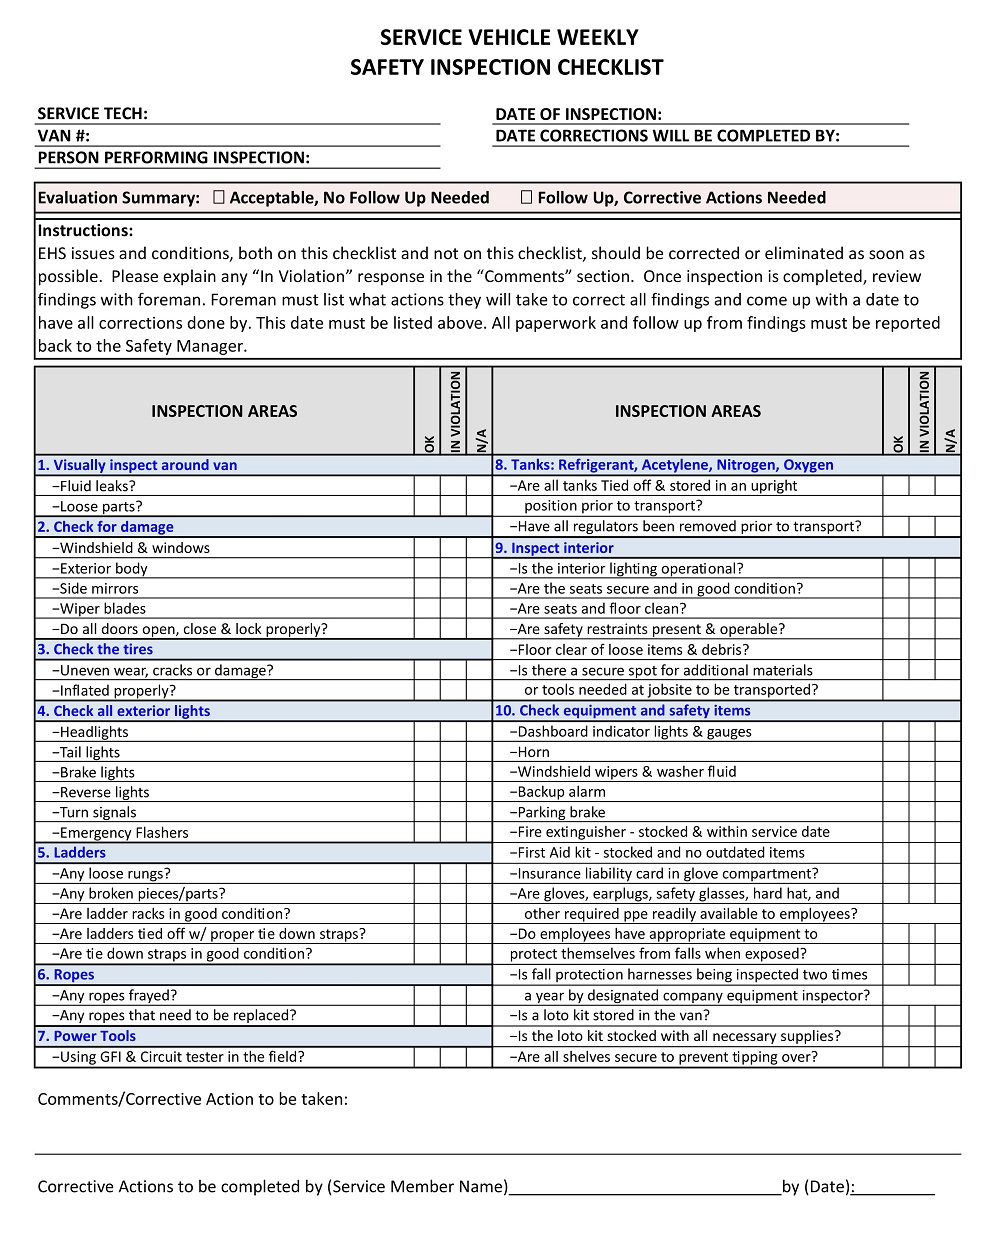 Weekly Vehicle Safety Inspection Checklist